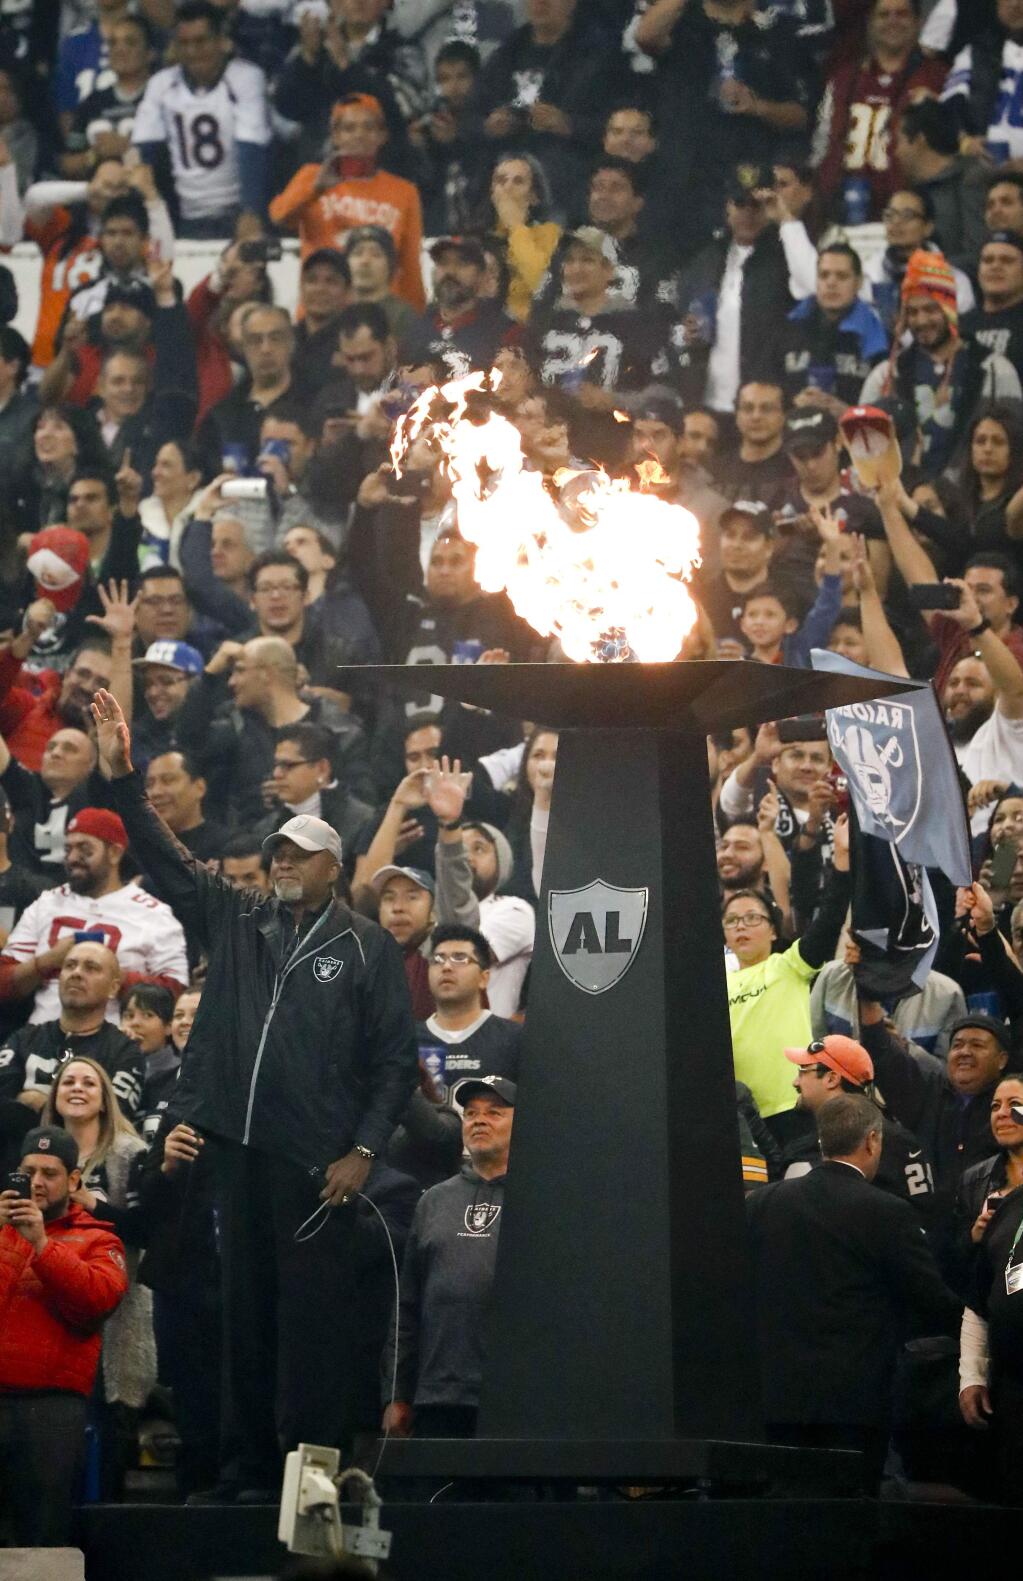 Tommie Smith, below left, lights the torch in in honor of former Oakland Raiders before an NFL football game Monday, Nov. 21, 2016, in Mexico City. Smith is famous for his 1968 Olympics protest. (AP Photo/Eduardo Verdugo)